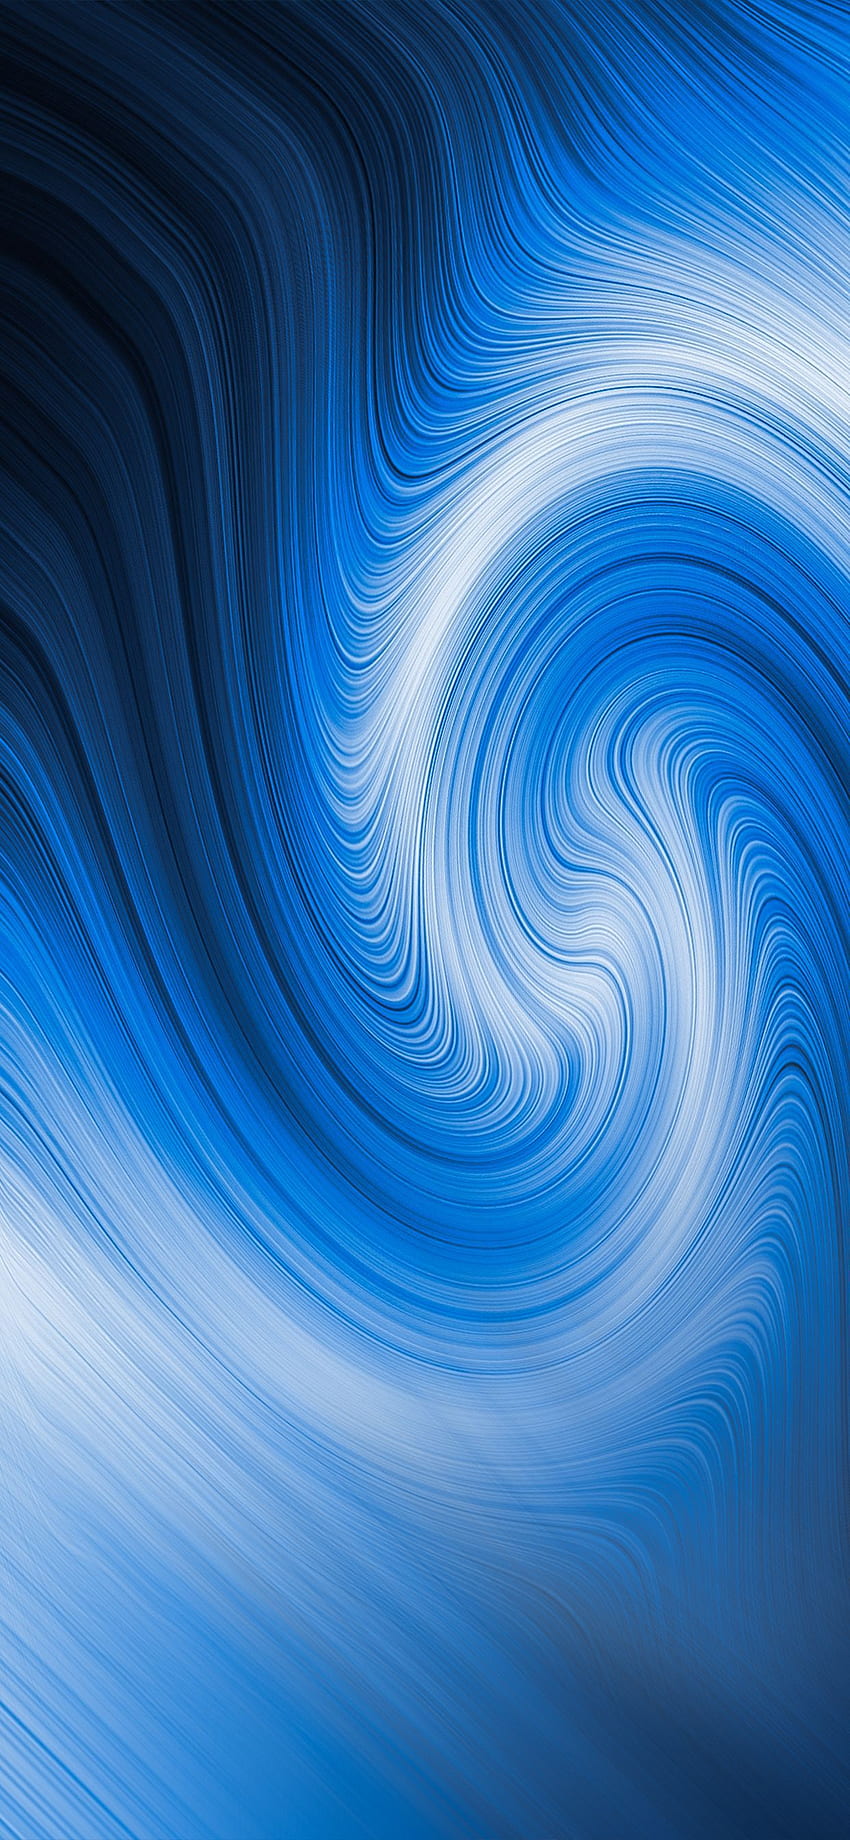 The blue swirl on Twitter. Apple iphone, Background phone , Beautiful for phone, Abstract Swirl HD phone wallpaper